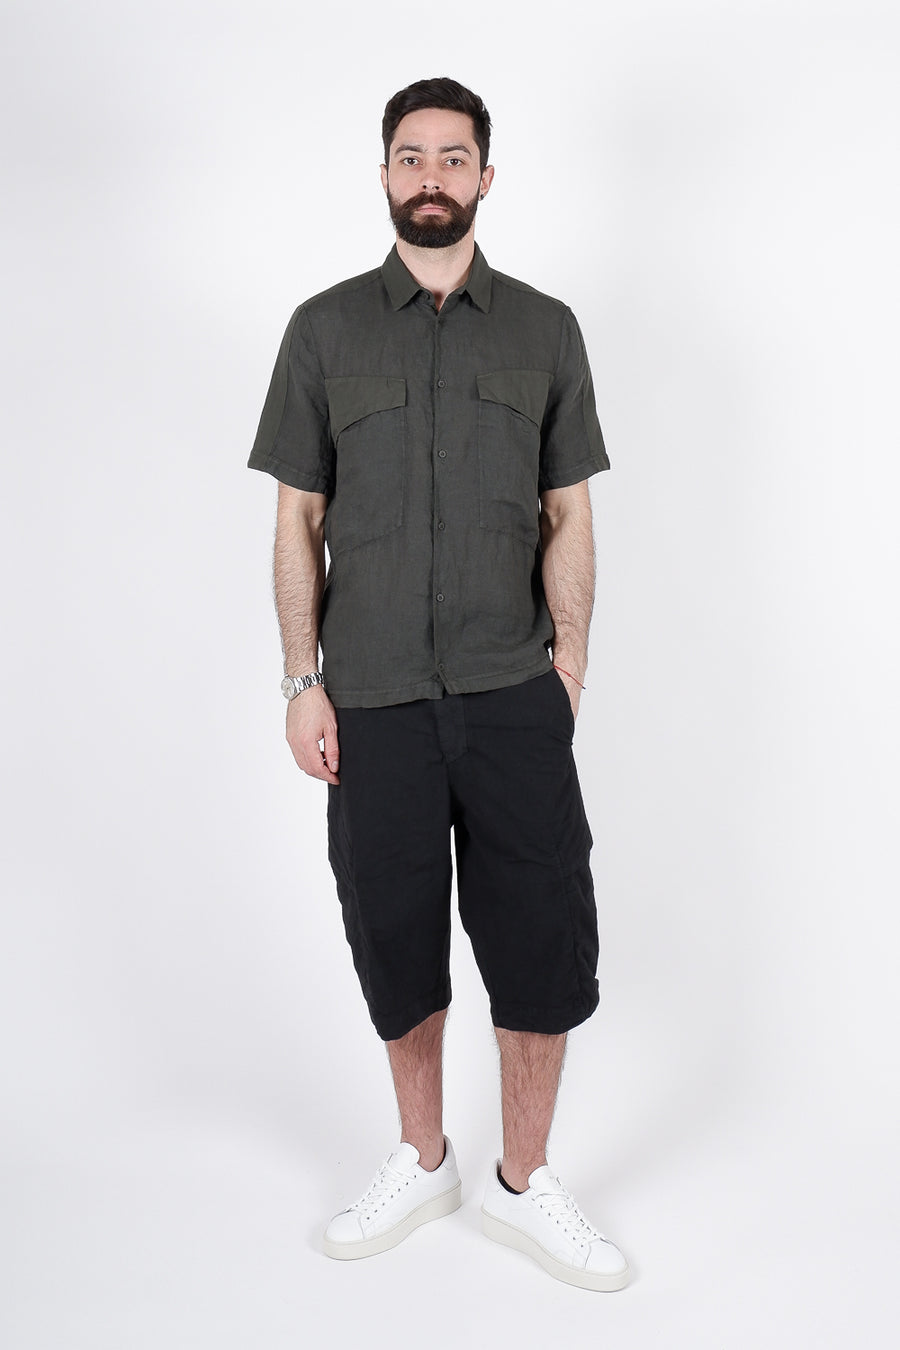 Buy the Transit Loose-Fit S/S Linen Shirt in Green at Intro. Spend £50 for free UK delivery. Official stockists. We ship worldwide.